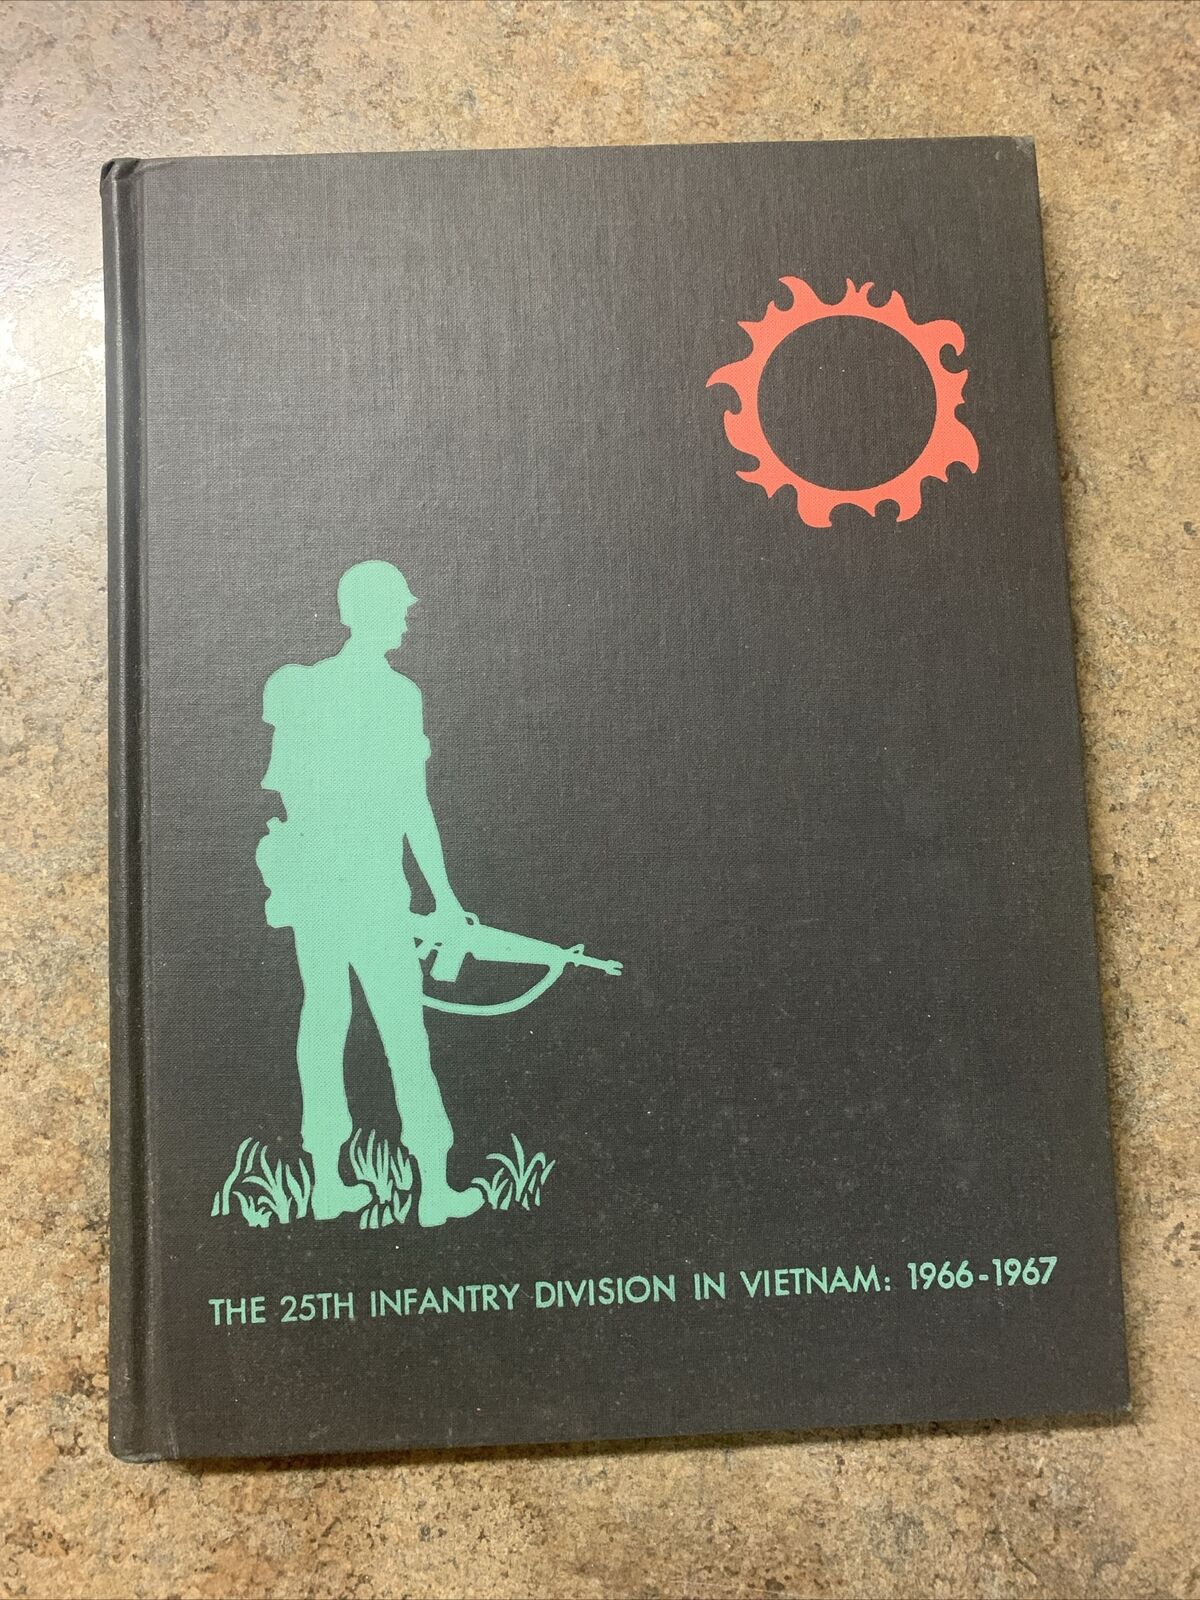 The 25th Infantry Division In Vietnam: 1966-1967 (Hardcover) War Military Rare